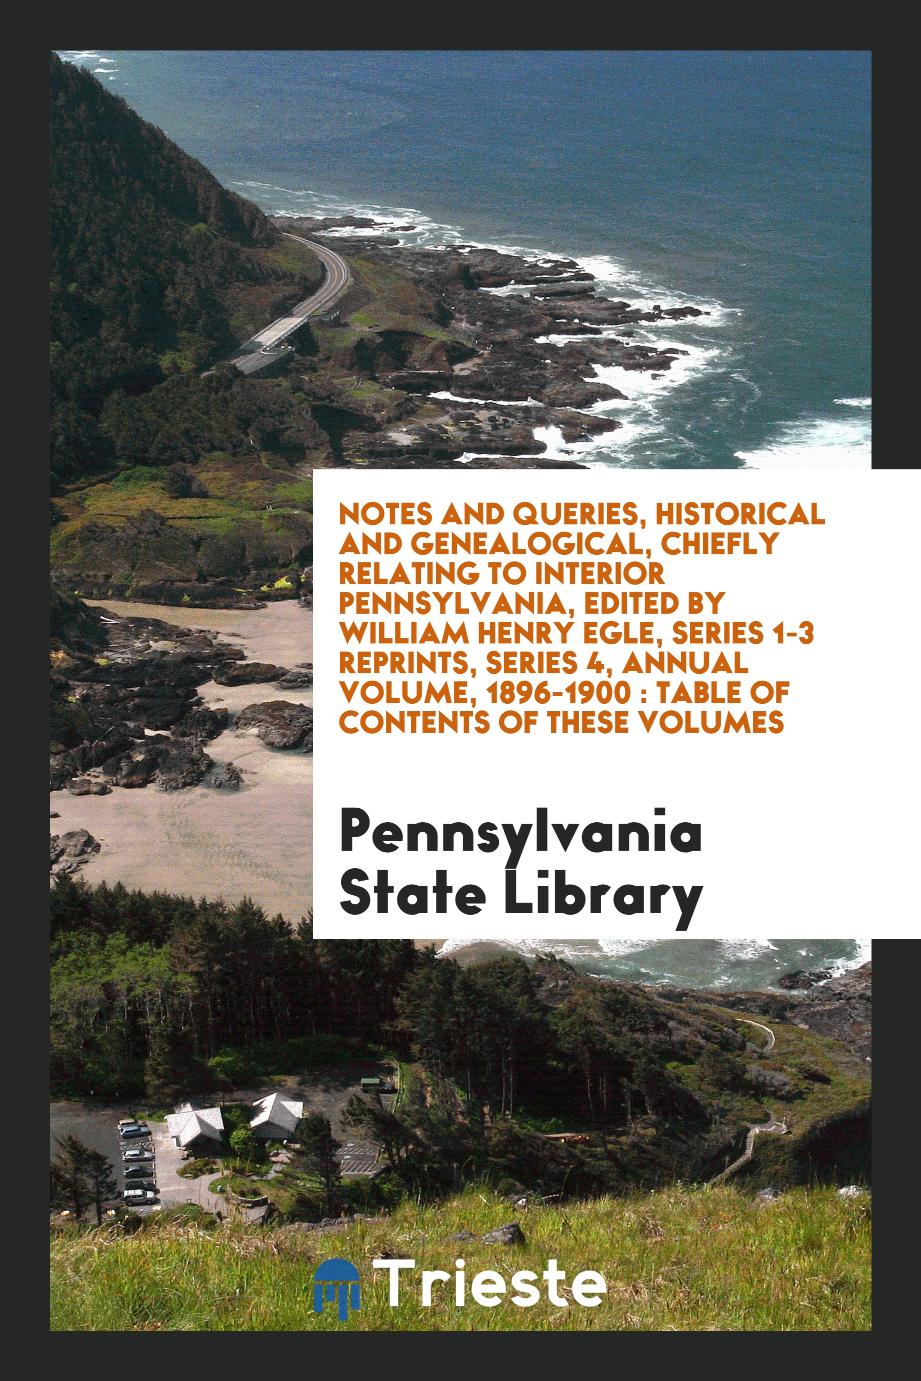 Notes and queries, historical and genealogical, chiefly relating to interior Pennsylvania, edited by William Henry Egle, series 1-3 reprints, series 4, annual volume, 1896-1900 : table of contents of these volumes